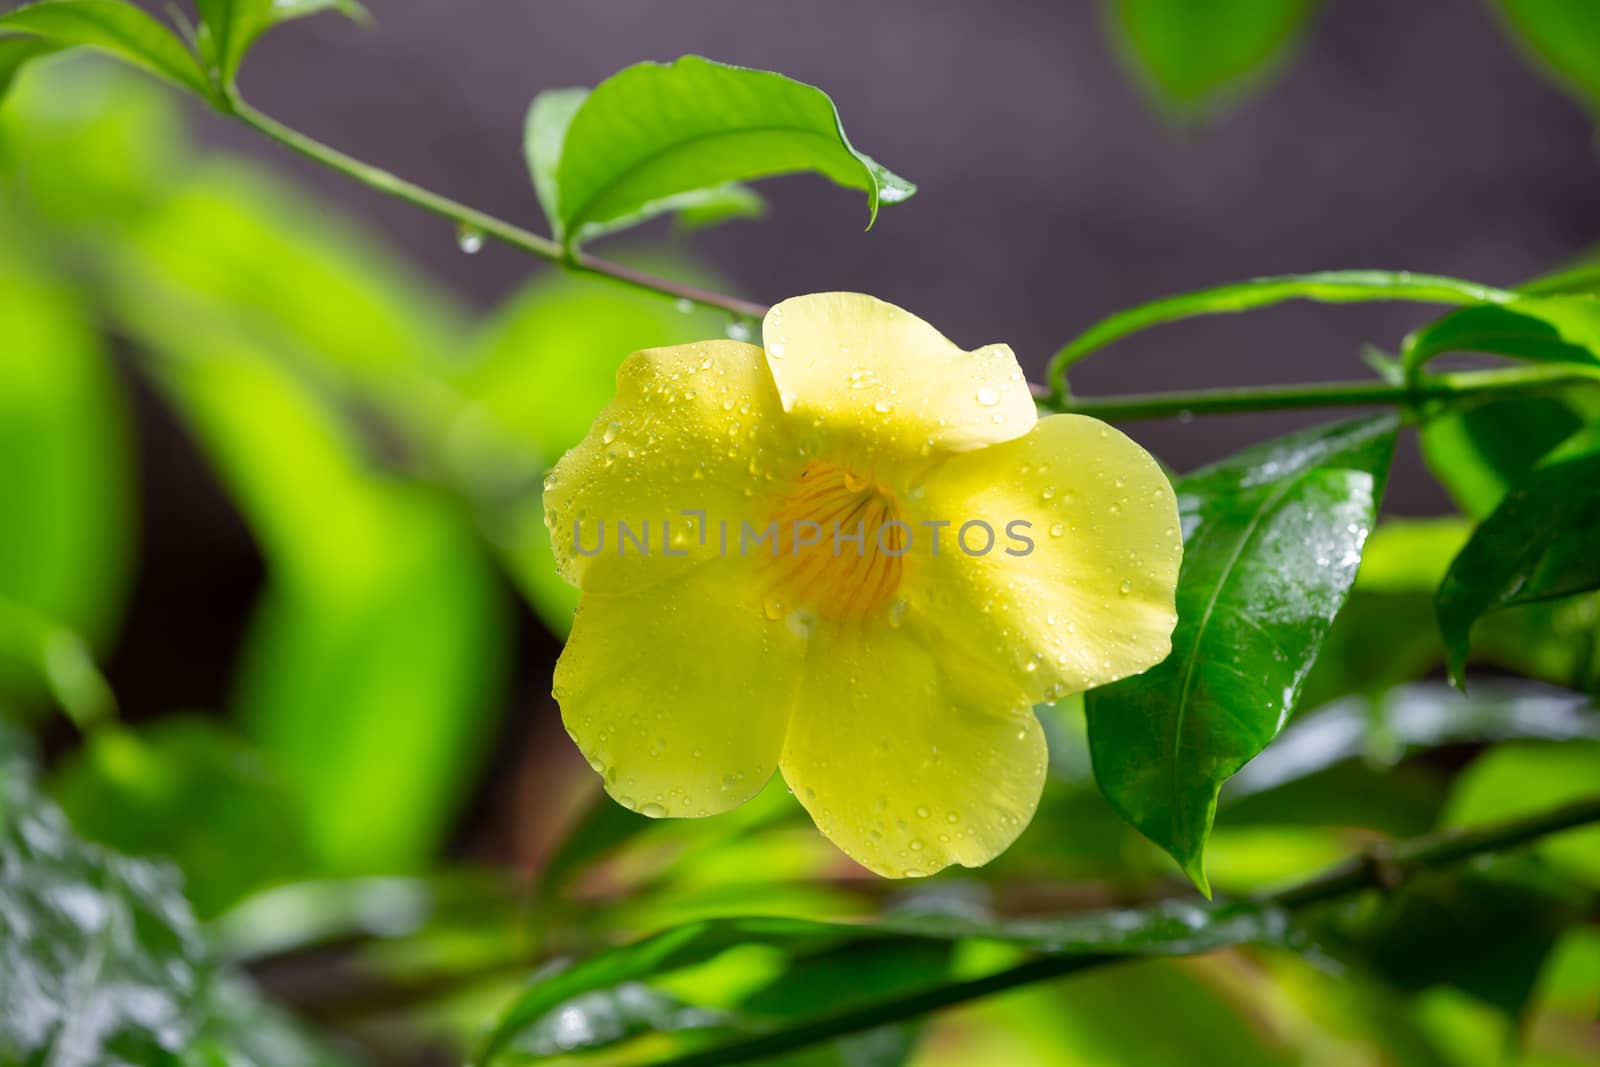 One yellow native flower of Madagascar with small raindrops